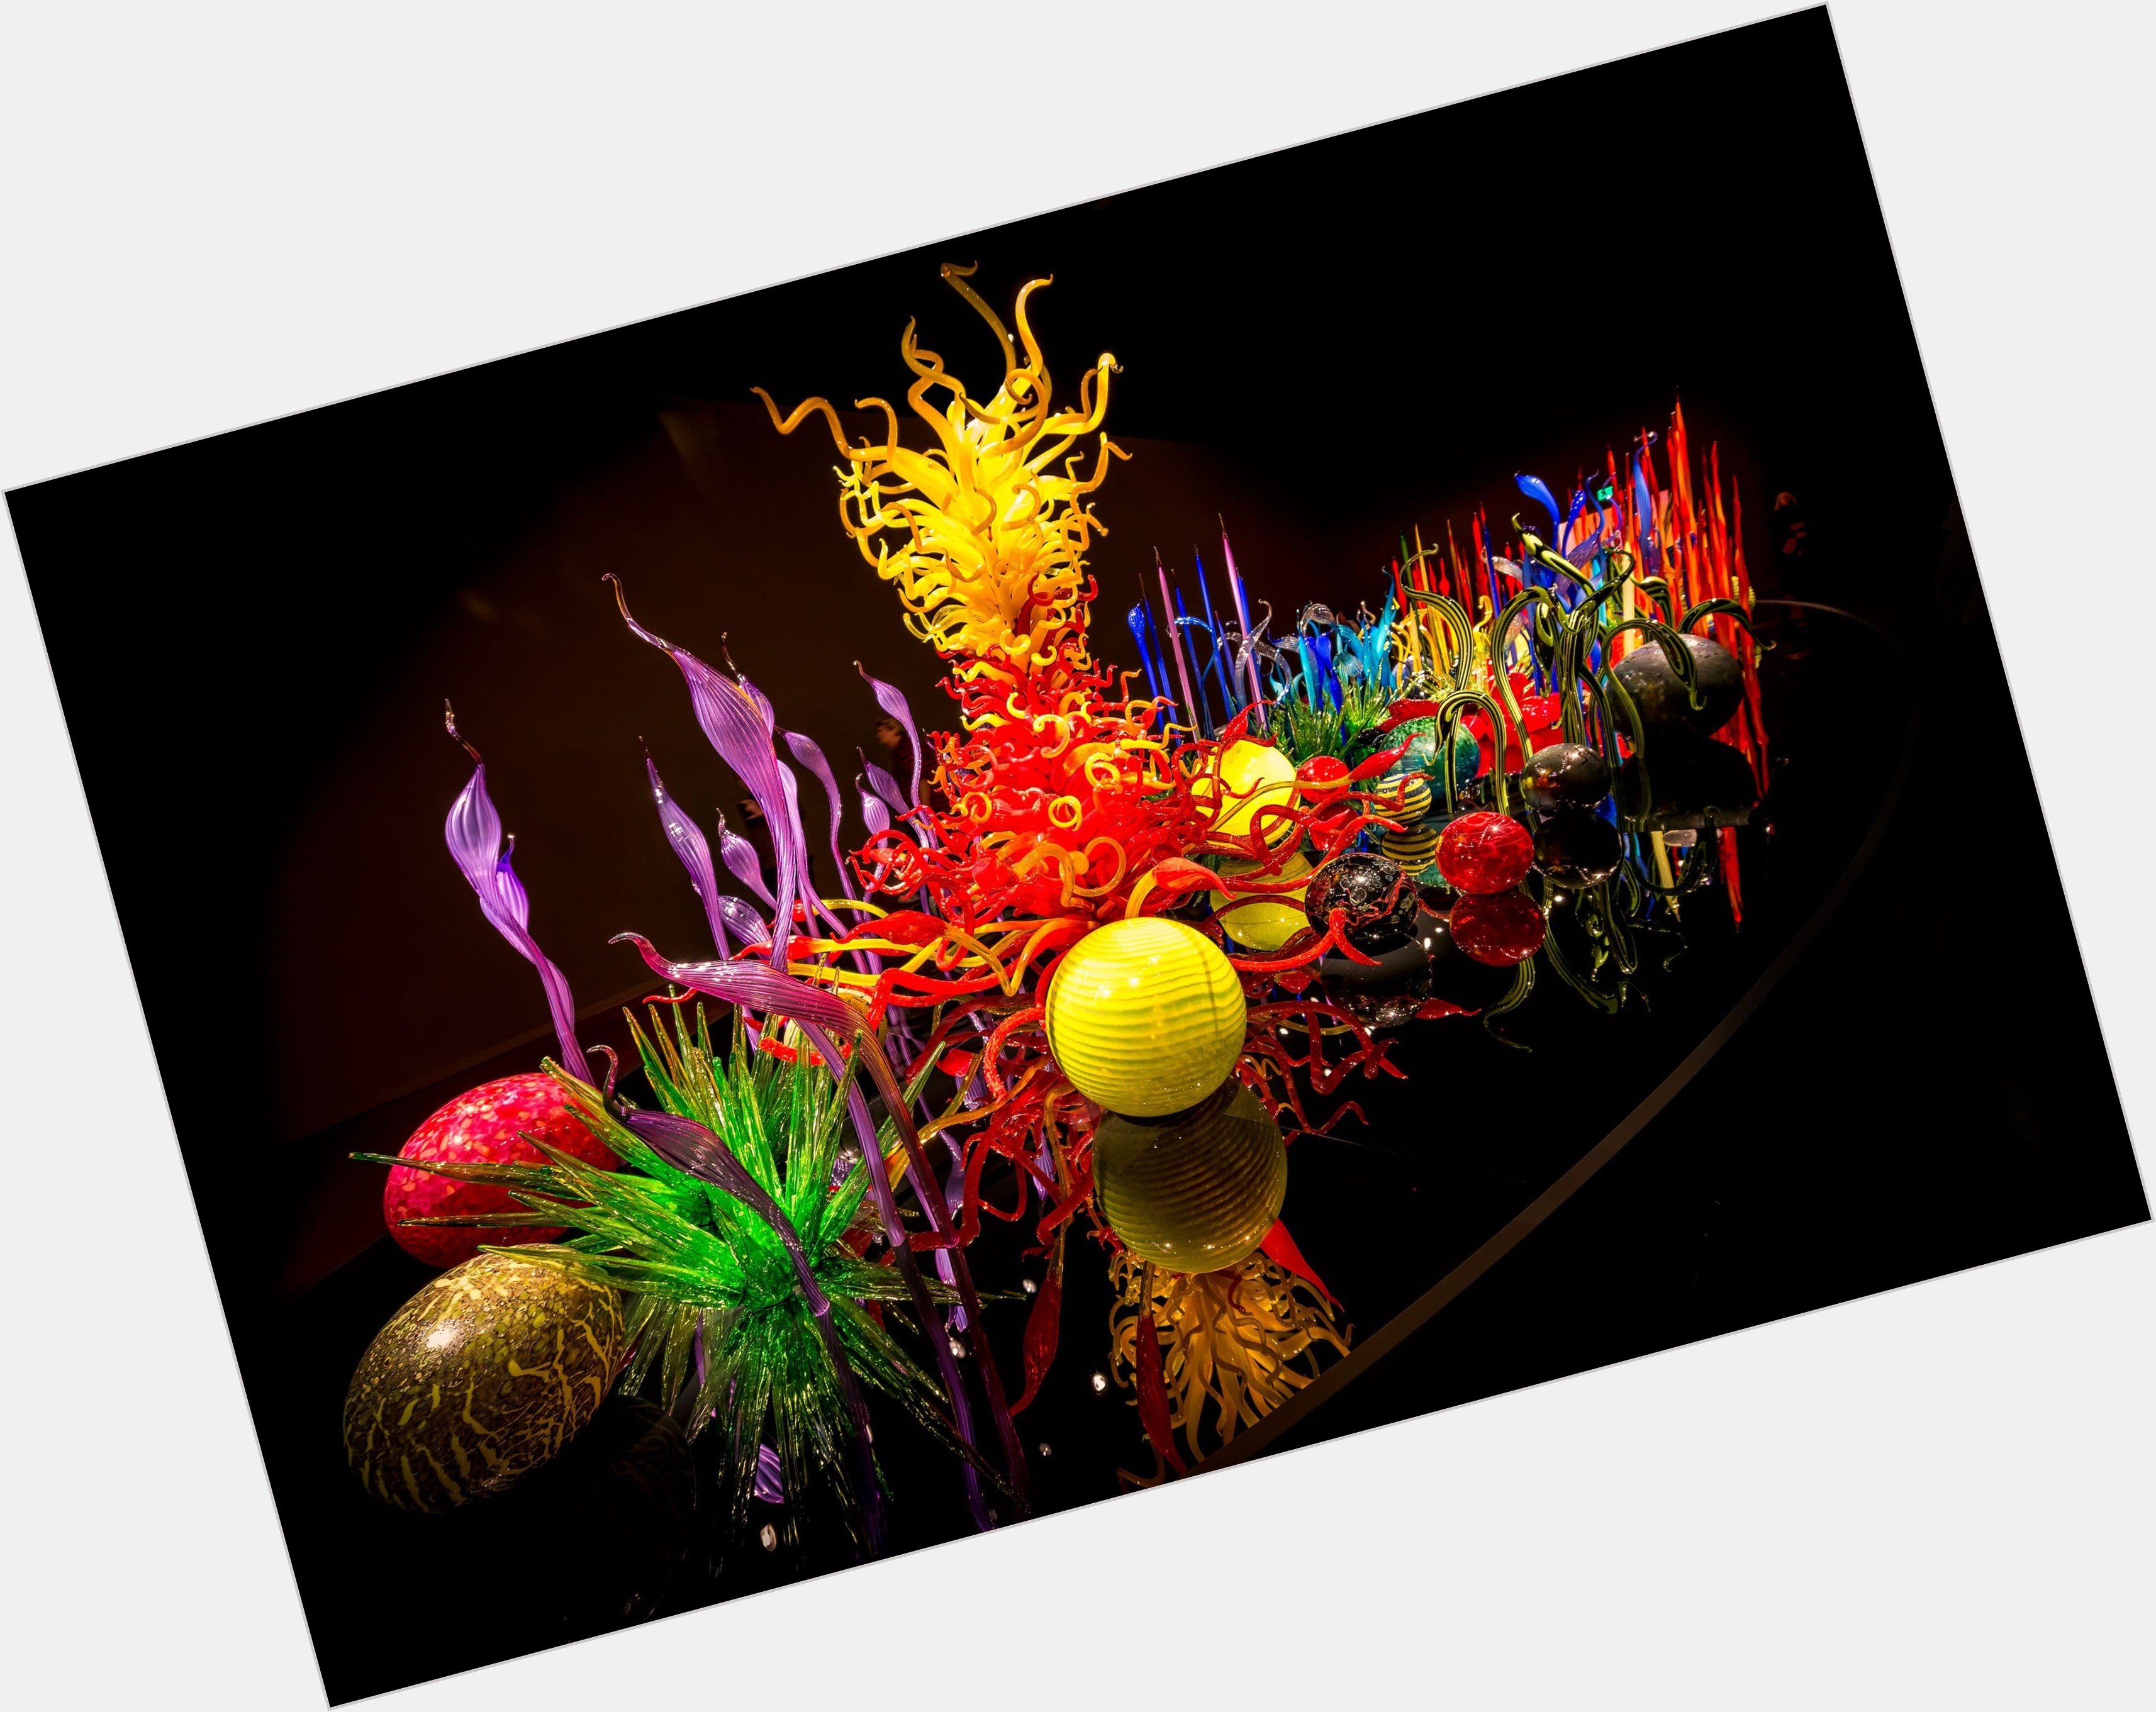 Https://fanpagepress.net/m/D/dale Chihuly Paintings 3